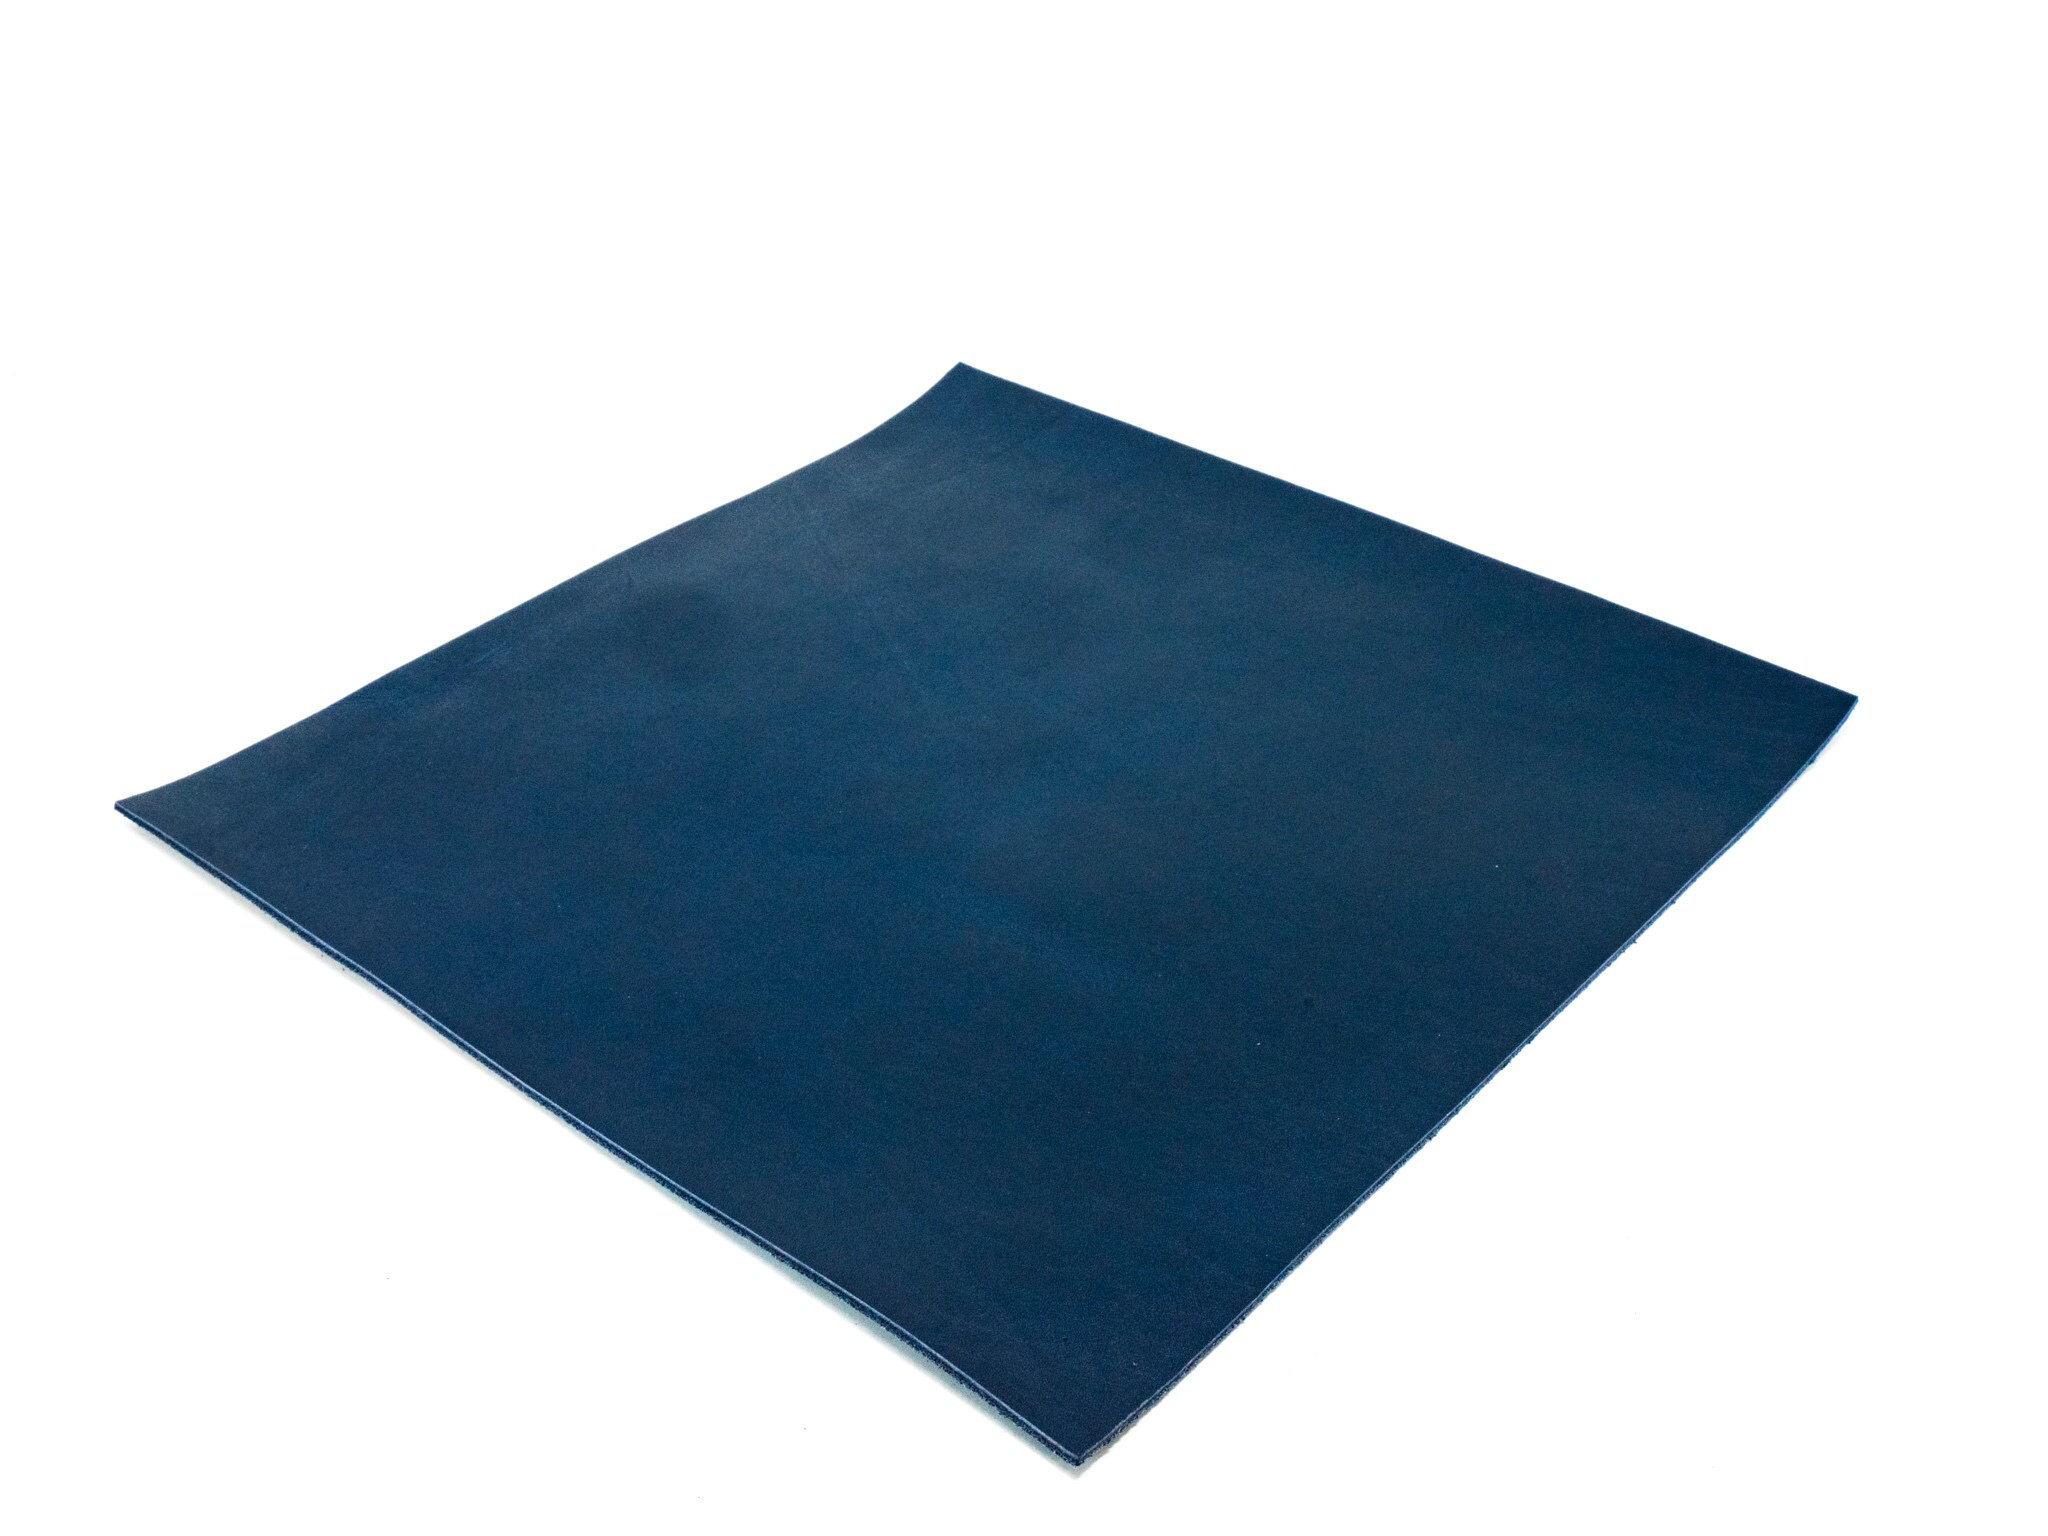 Blue Milwaukee Leather Pieces for Crafting, Leather Cowhide Hide 23 Sq. Ft.  and Square 12x12, Leather Supplies, Leather Strip for DIY 